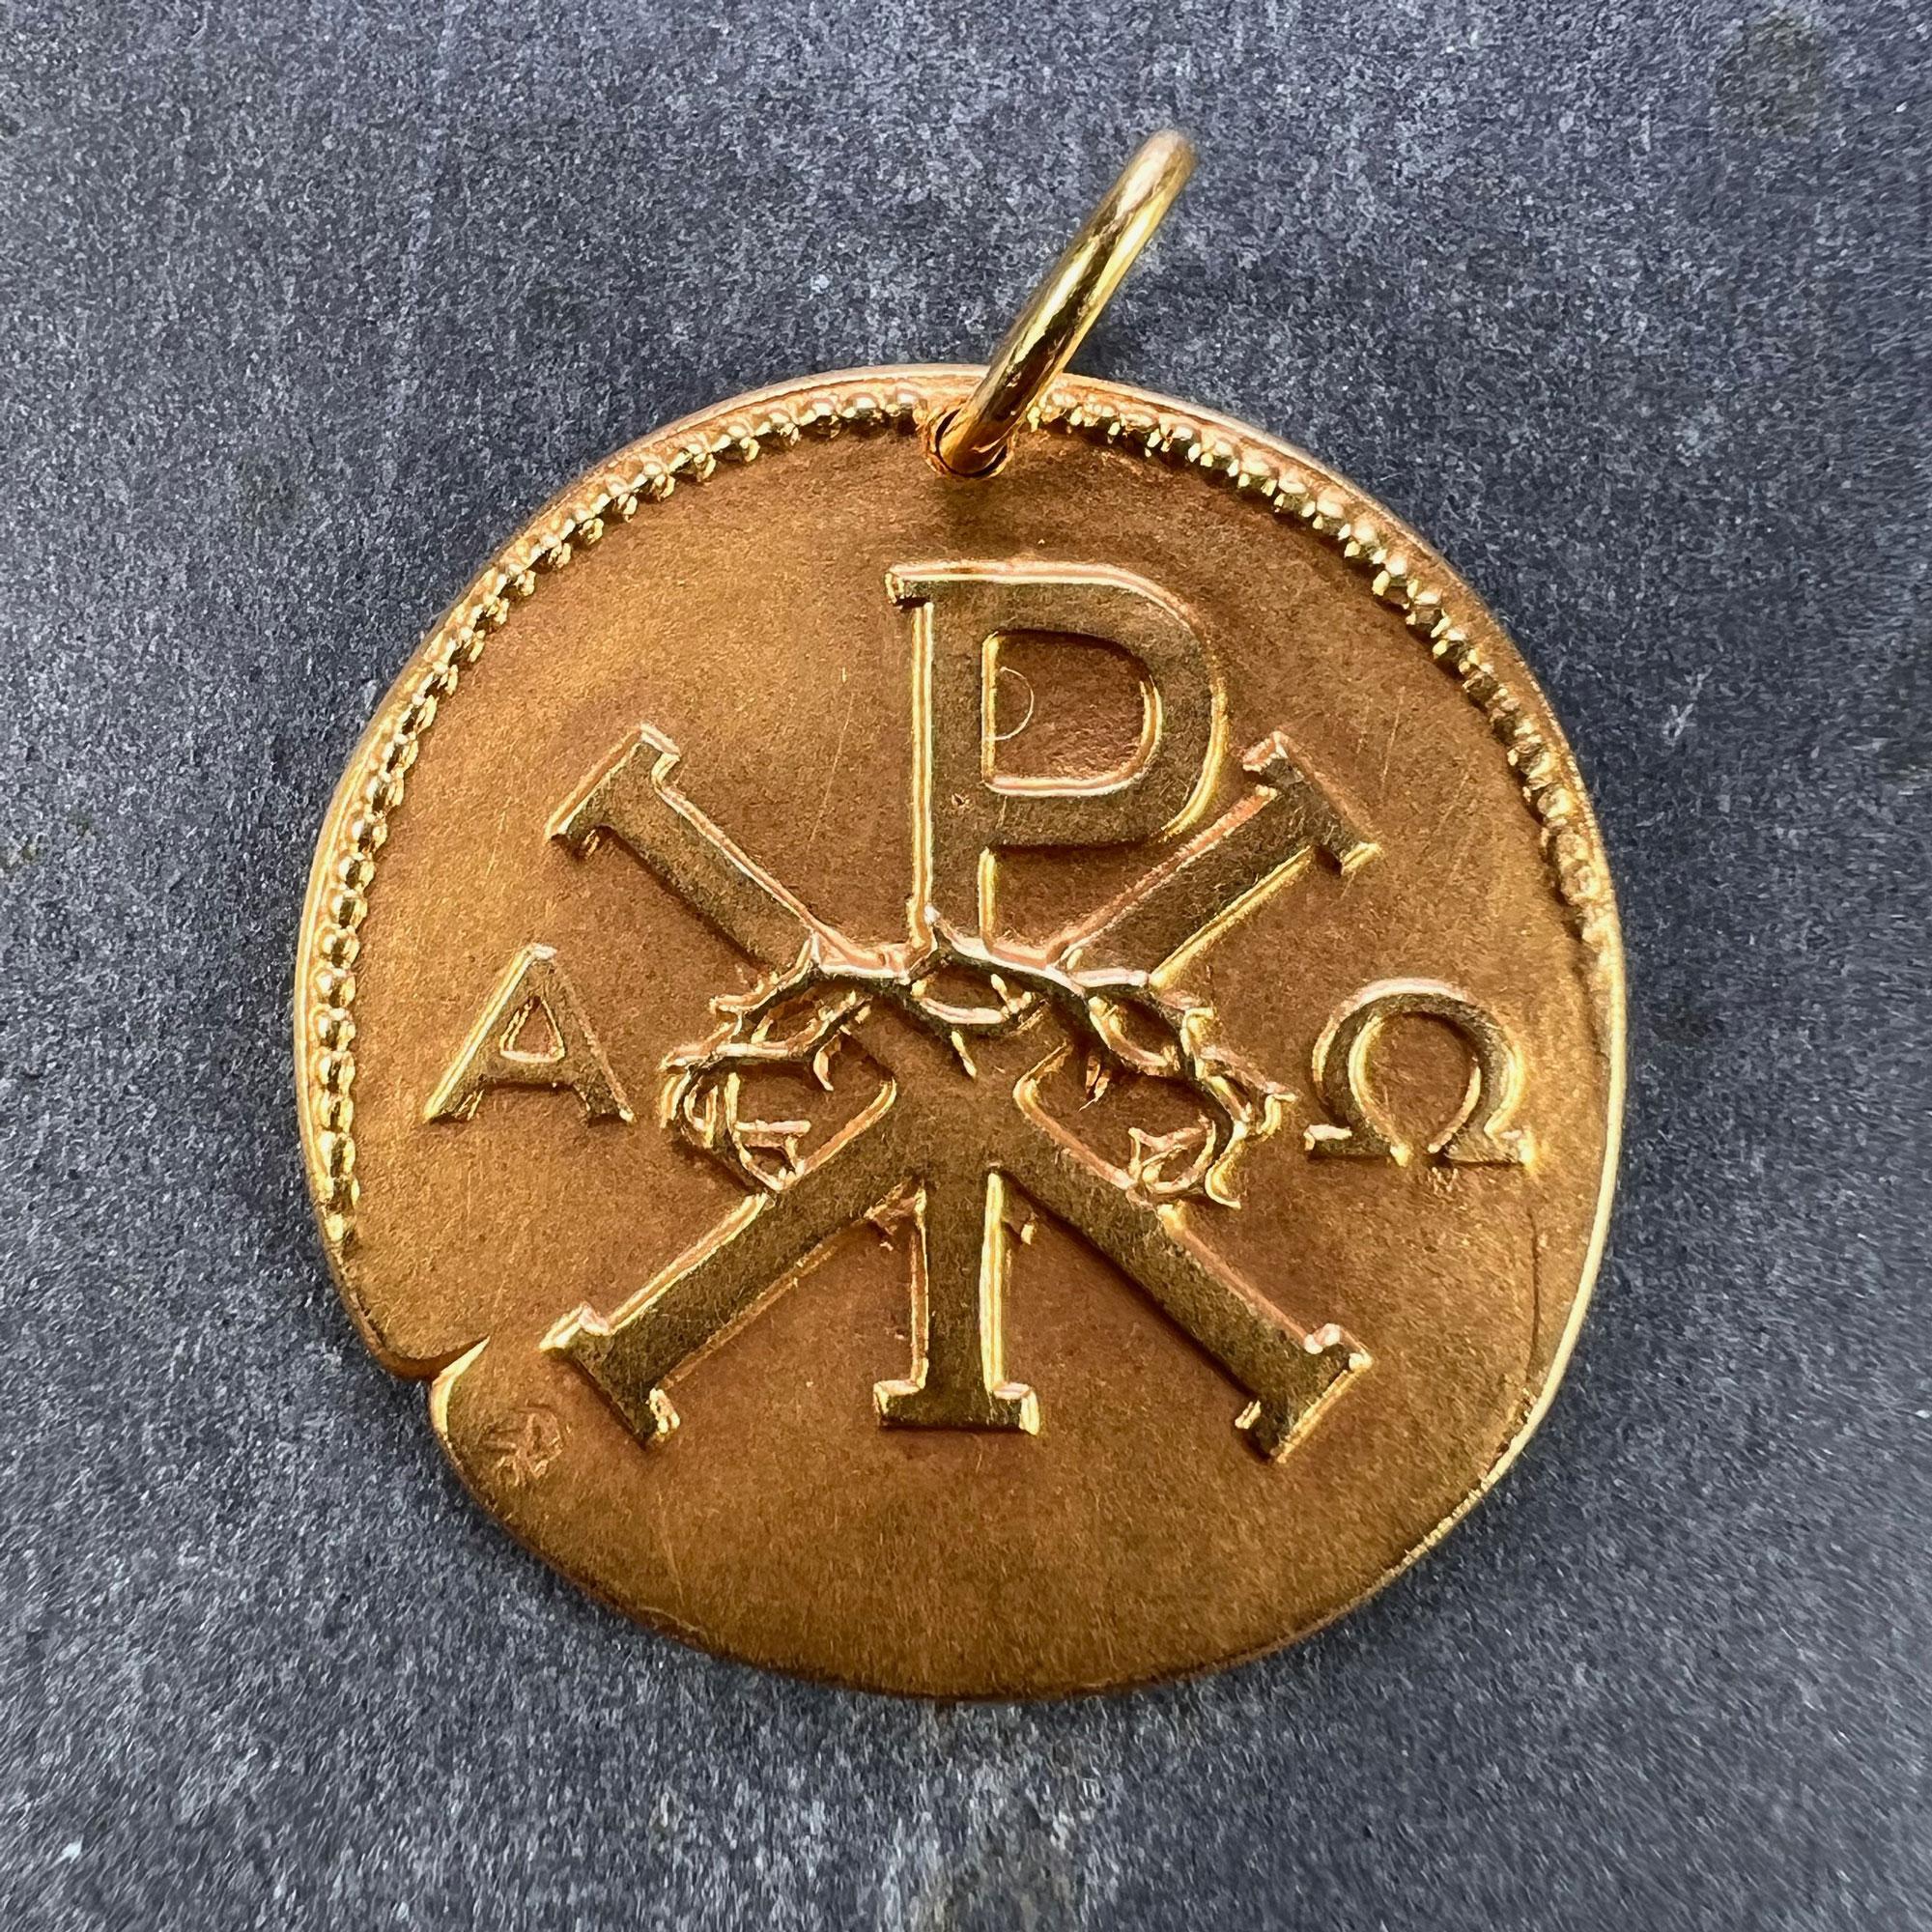 A French 18 karat (18K) yellow gold religious medal pendant depicting the symbol for Chi Rho entwined with the crown of thorns, surrounded by the letters Alpha and Omega (all being symbols of Jesus Christ to one side. 

The reverse depicts the head